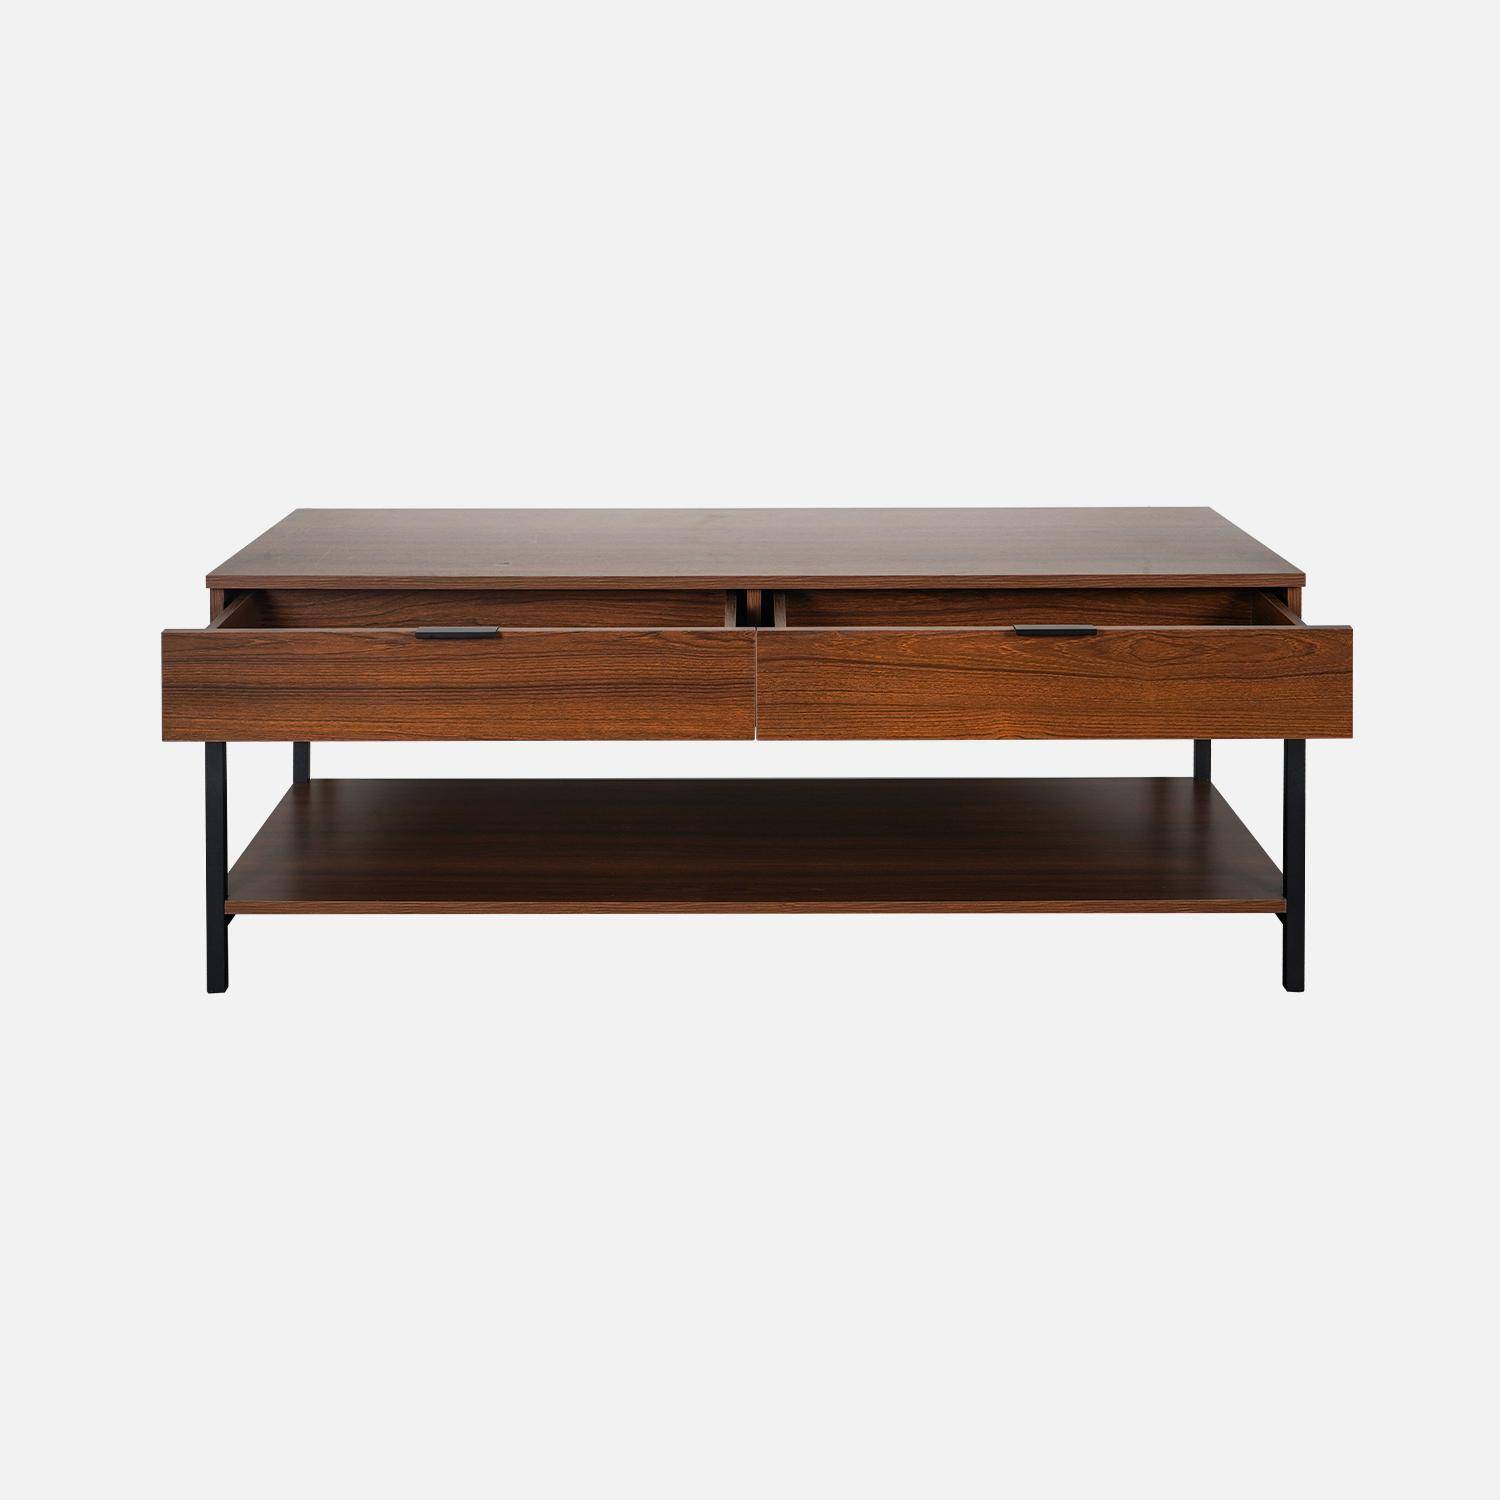 Walnut-coloured coffee table with black metal legs and handle - 2 drawers and 1 shelf,sweeek,Photo6